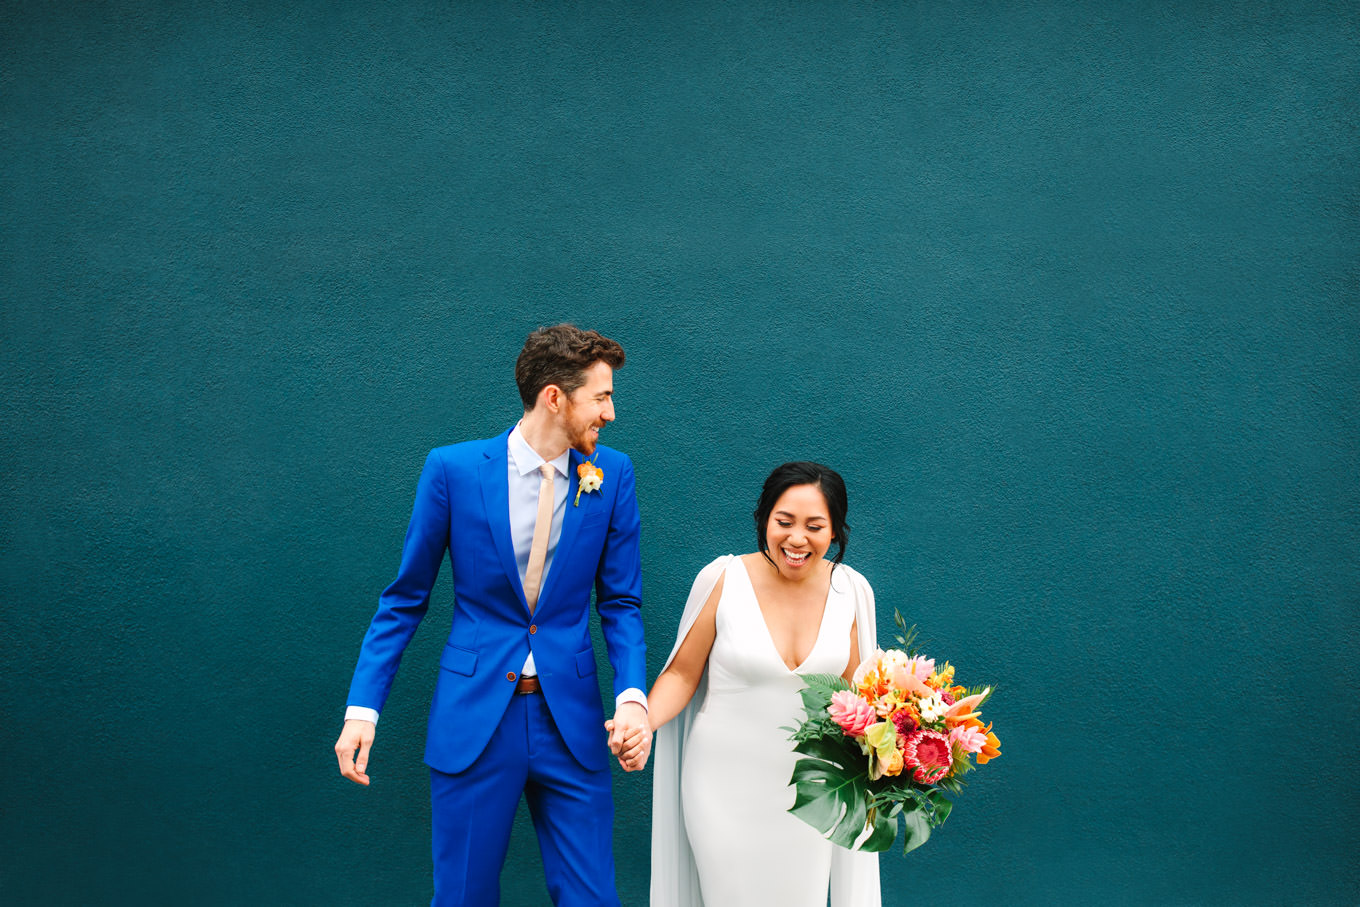 Bride and groom laughing in front of teal wall | TV inspired wedding at The Fig House Los Angeles | Published on The Knot | Fresh and colorful photography for fun-loving couples in Southern California | #losangeleswedding #TVwedding #colorfulwedding #theknot   Source: Mary Costa Photography | Los Angeles wedding photographer